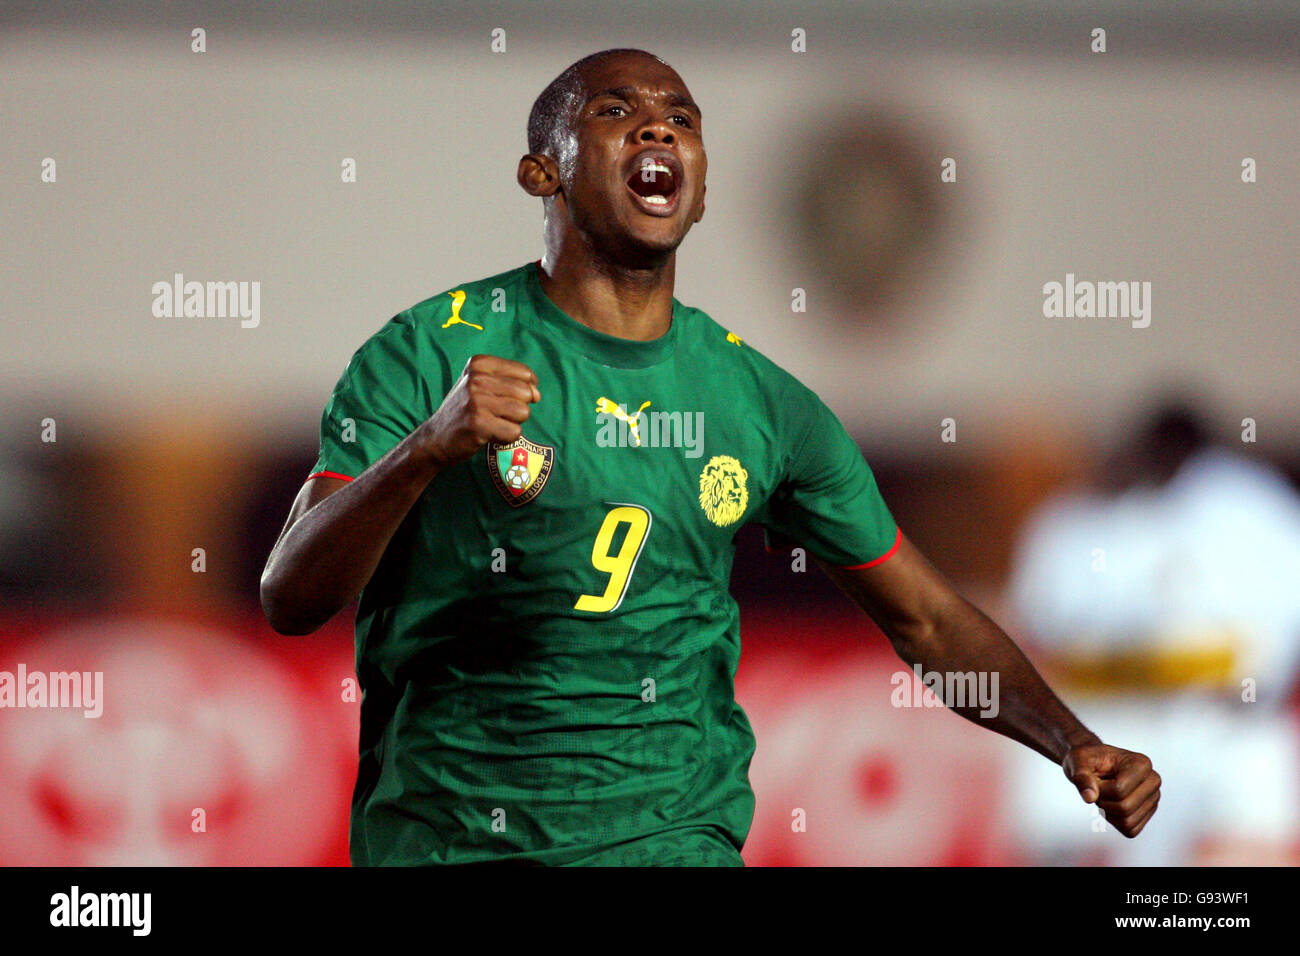 Soccer - African Cup of Nations 2006 - Group B - Cameroon v Angola - Military Academy Stadium. Cameroon's Samuel Eto'o celebrates scoring Stock Photo